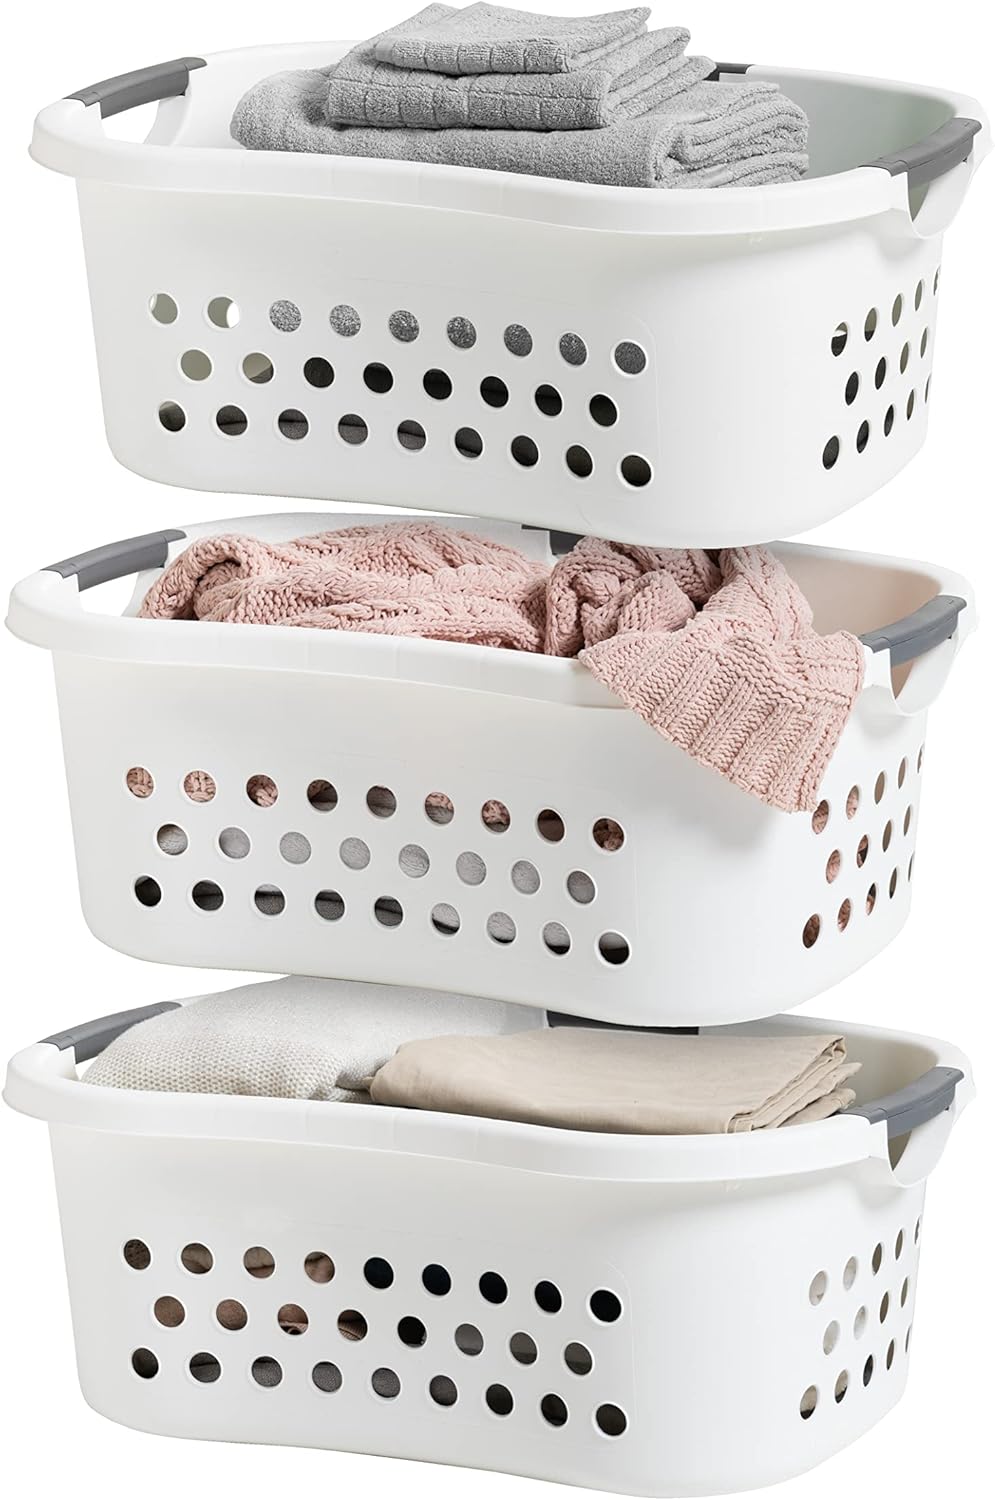 I bought these laundry baskets three years ago and loved them so much I bought three more a couple months ago. The new ones are not at all as sturdy as the originals, all three have had at least one handle break while carrying a normal amount of laundry (once when it was entirely folded and so help me) I have three small kids and a serious laundry rotation, so it would have been nice to have 6 stackable baskets, but I wouldnt recommend them now as theyre pretty flimsy.